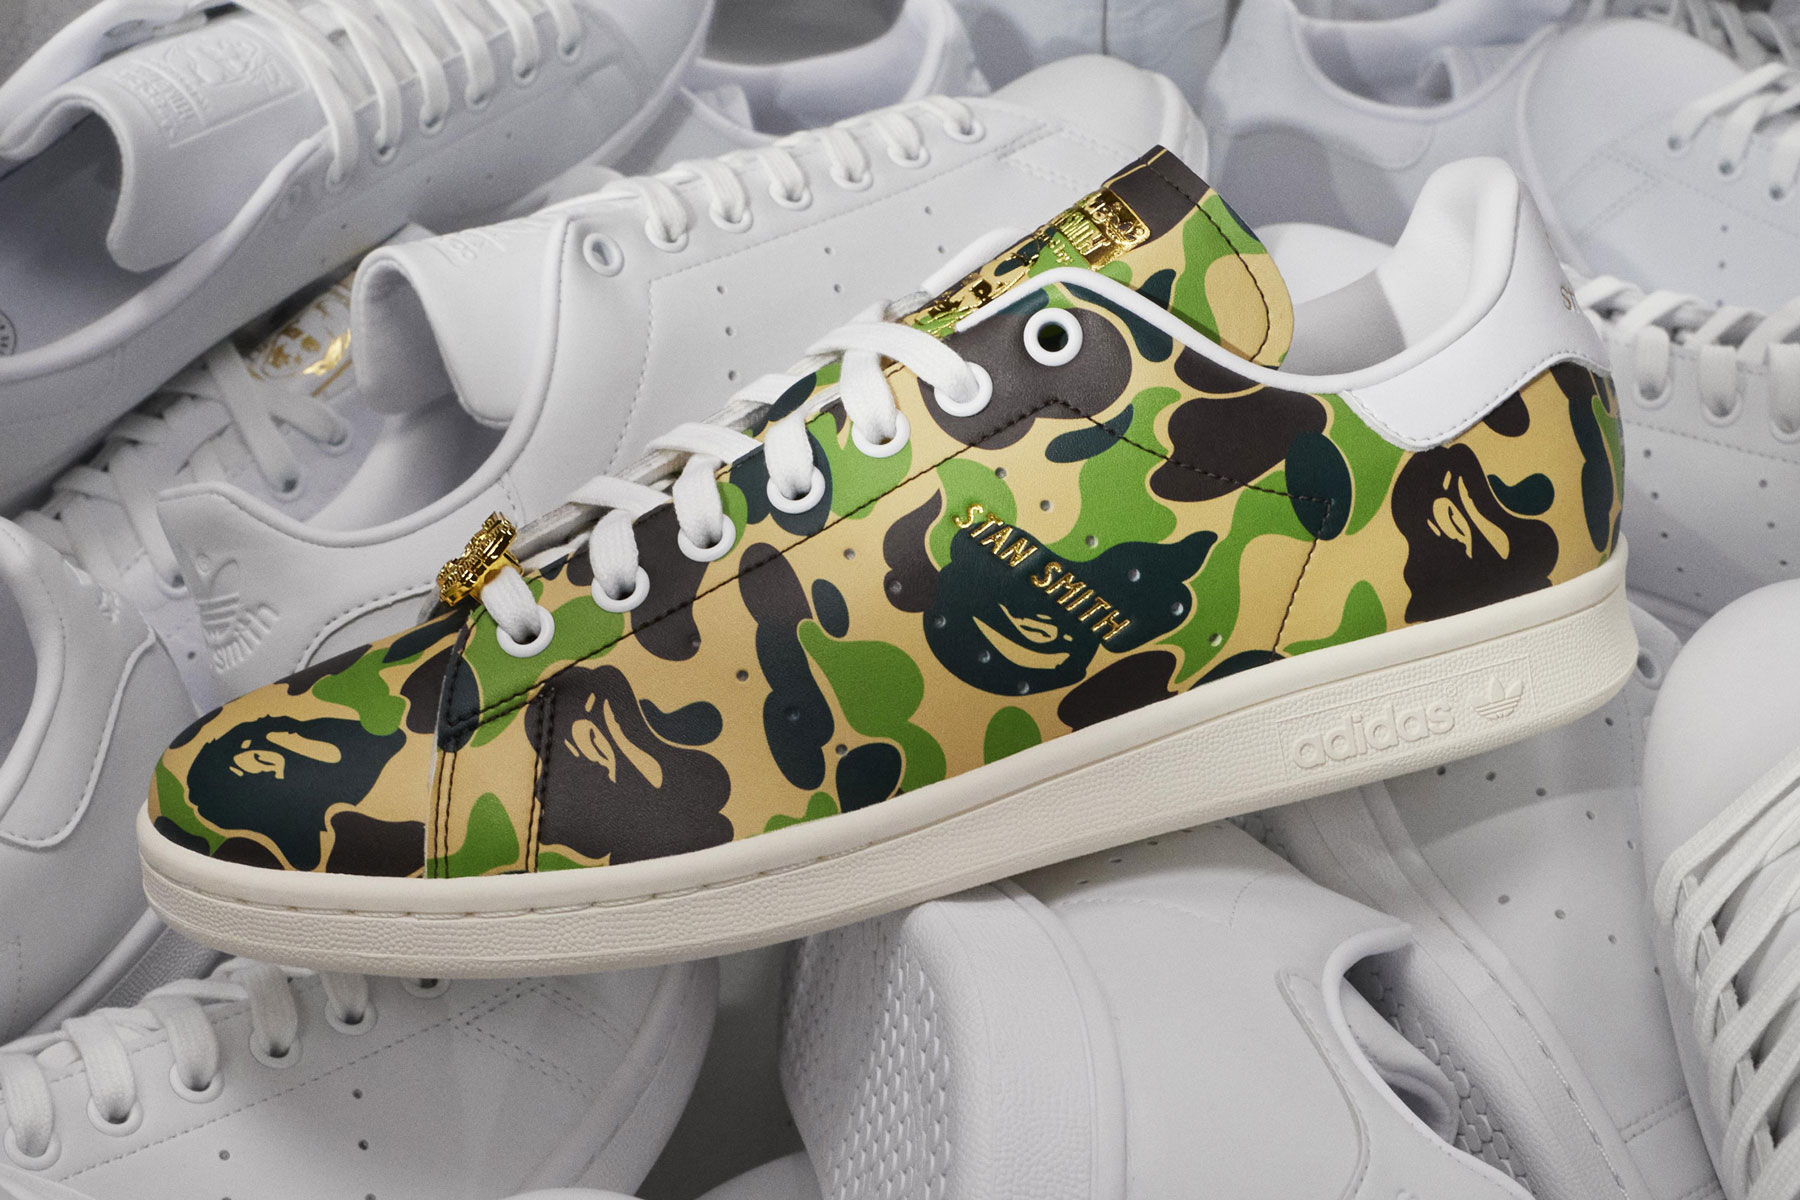 BAPE & adidas Add the Stan Smith “ABC CAMO” to Their 30th Anniversary Offering